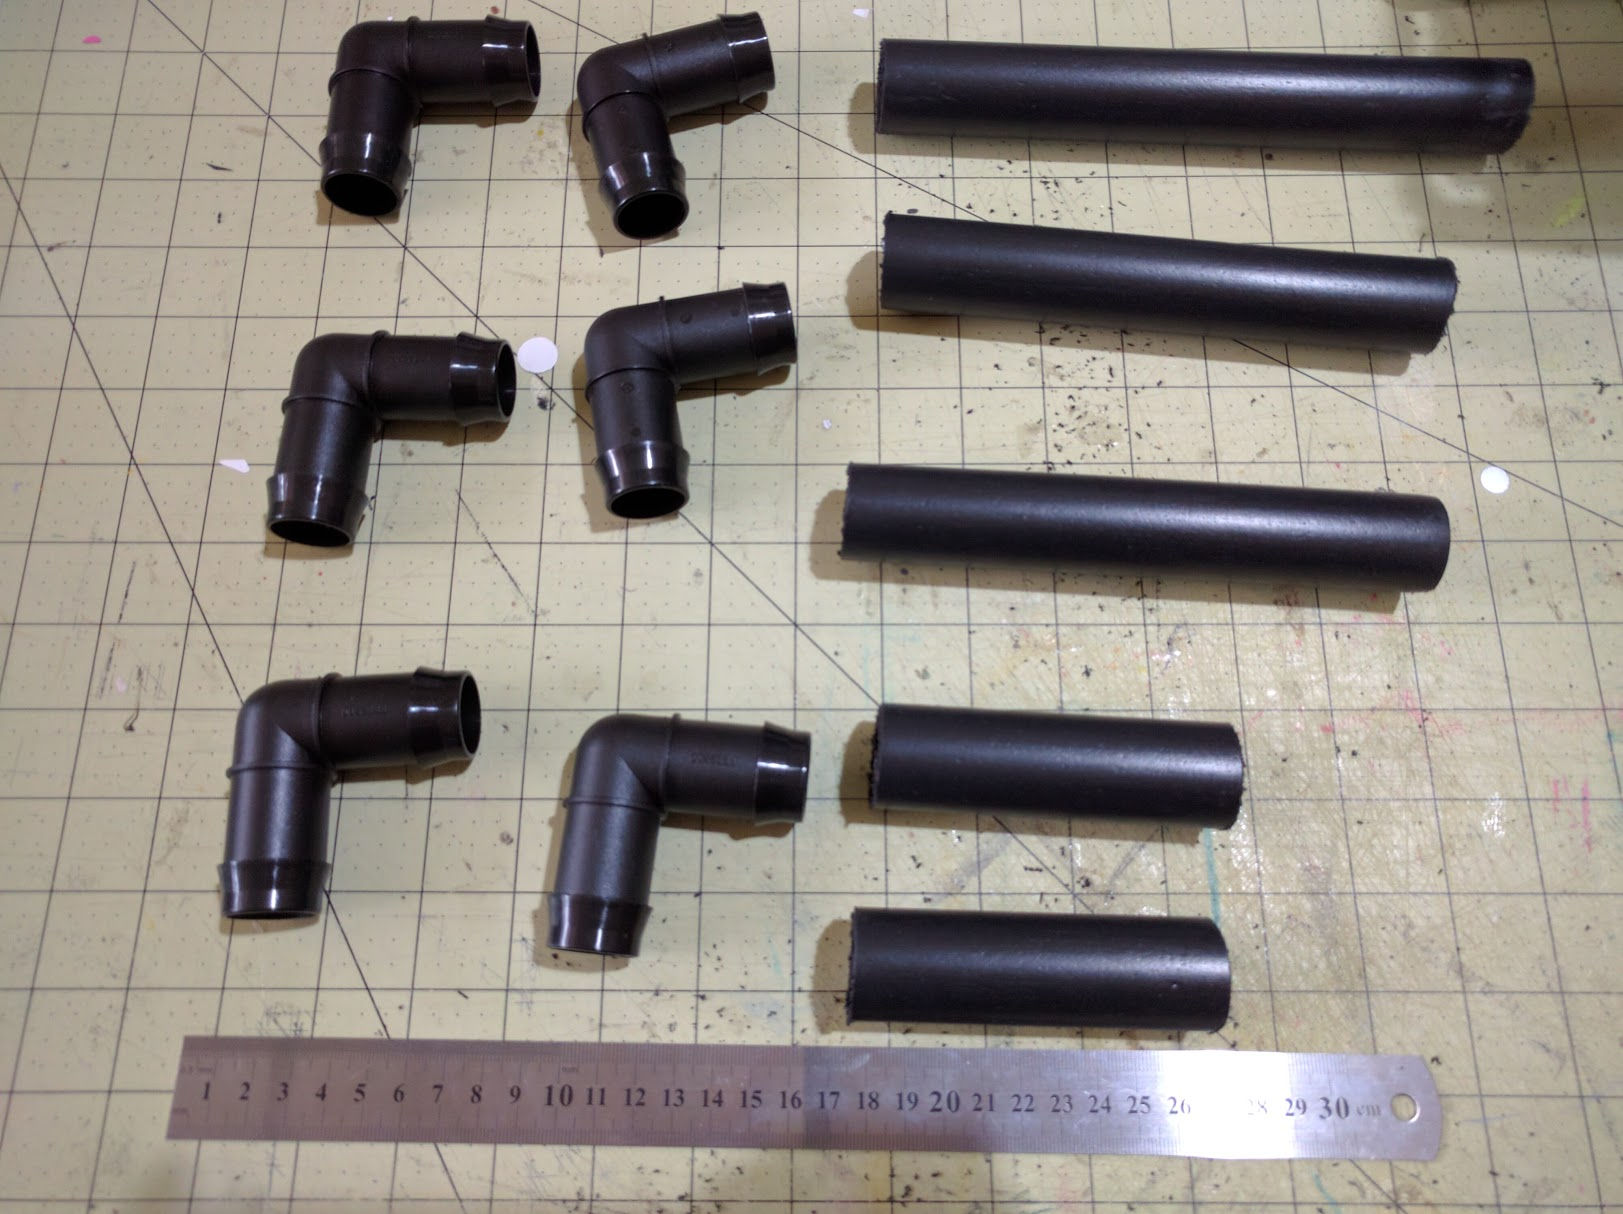 Lengths of pipe cut to size